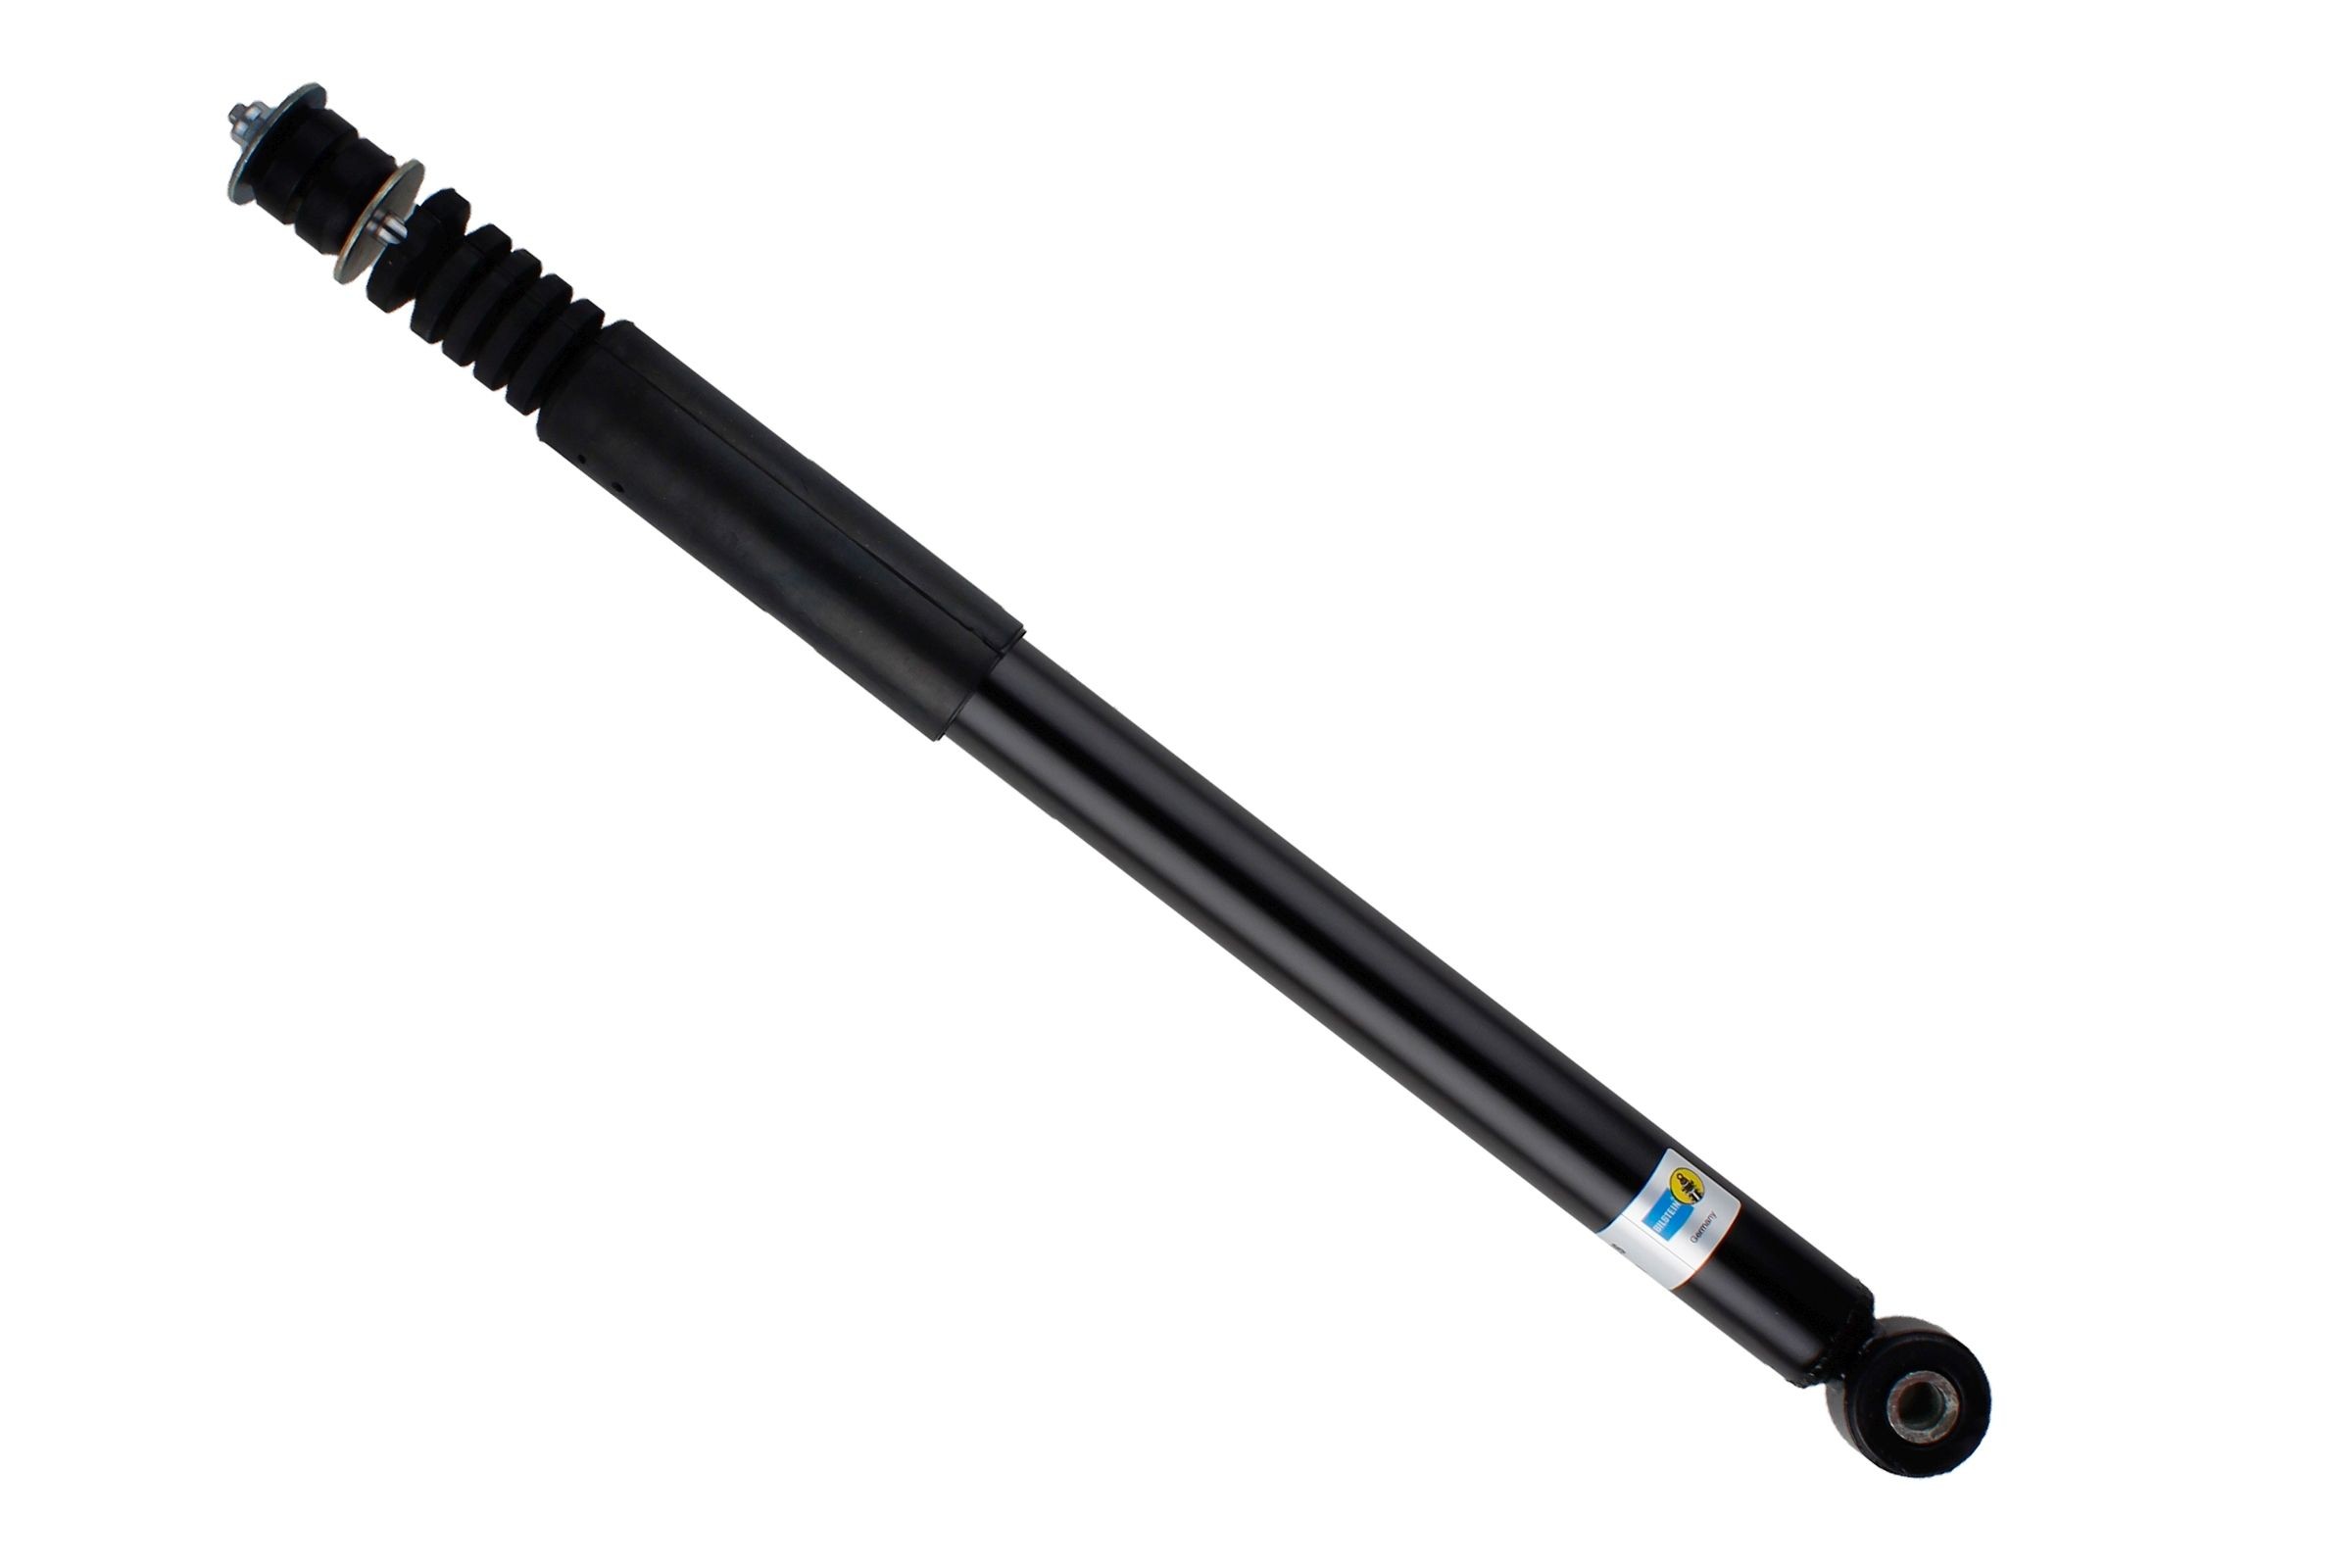 BILSTEIN - B4 OE Replacement 19-143026 Shock absorber Rear Axle, Gas Pressure, Twin-Tube, Absorber does not carry a spring, Bottom eye, Top pin